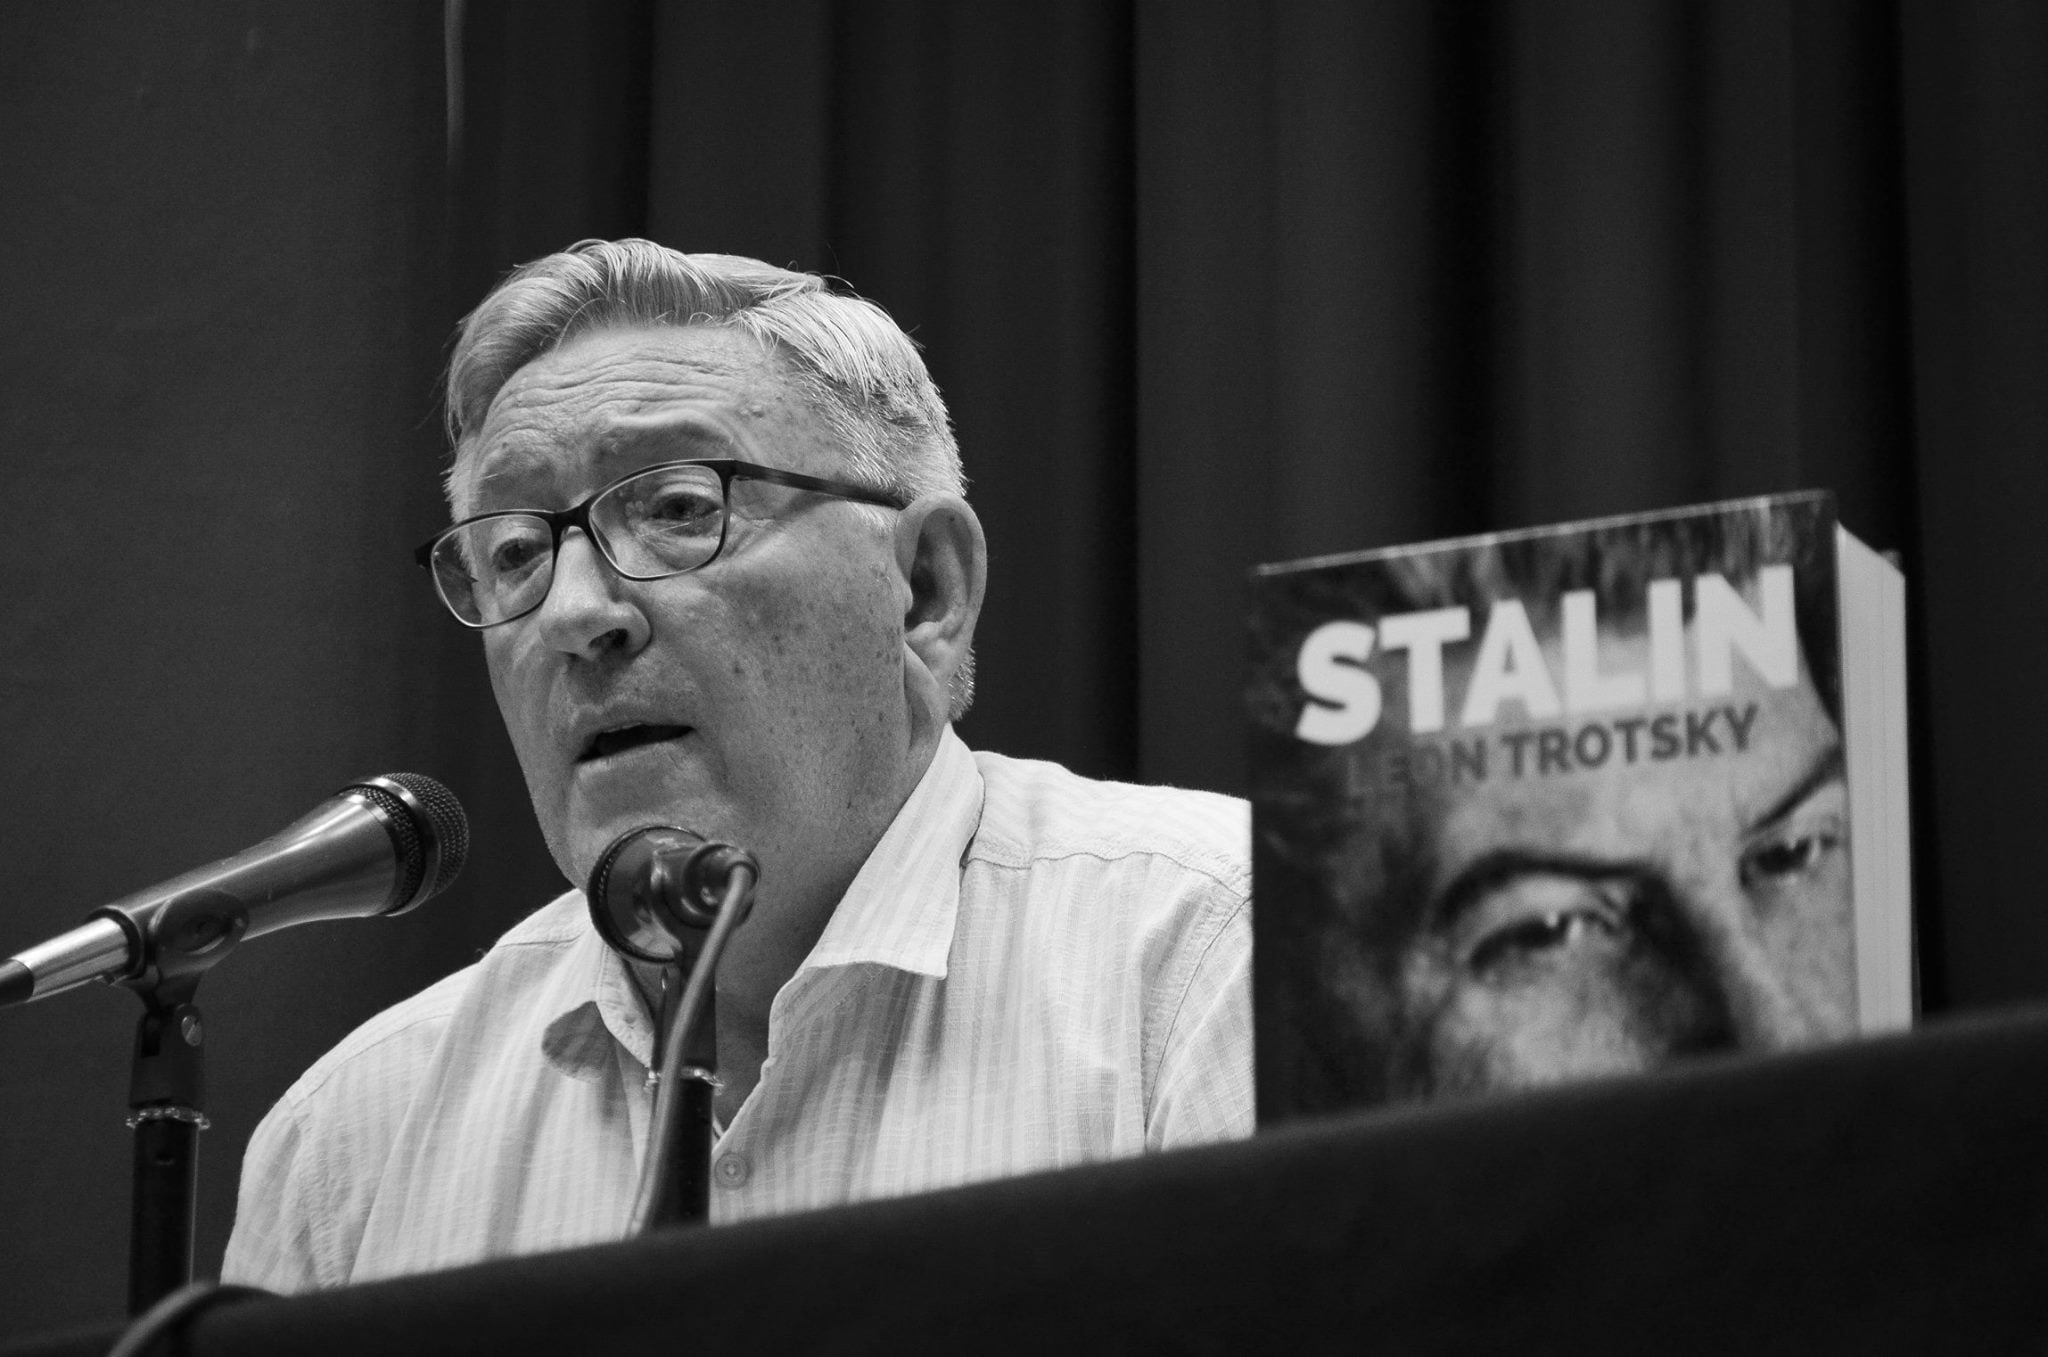 International launch of Trotsky’s “Stalin” a great success